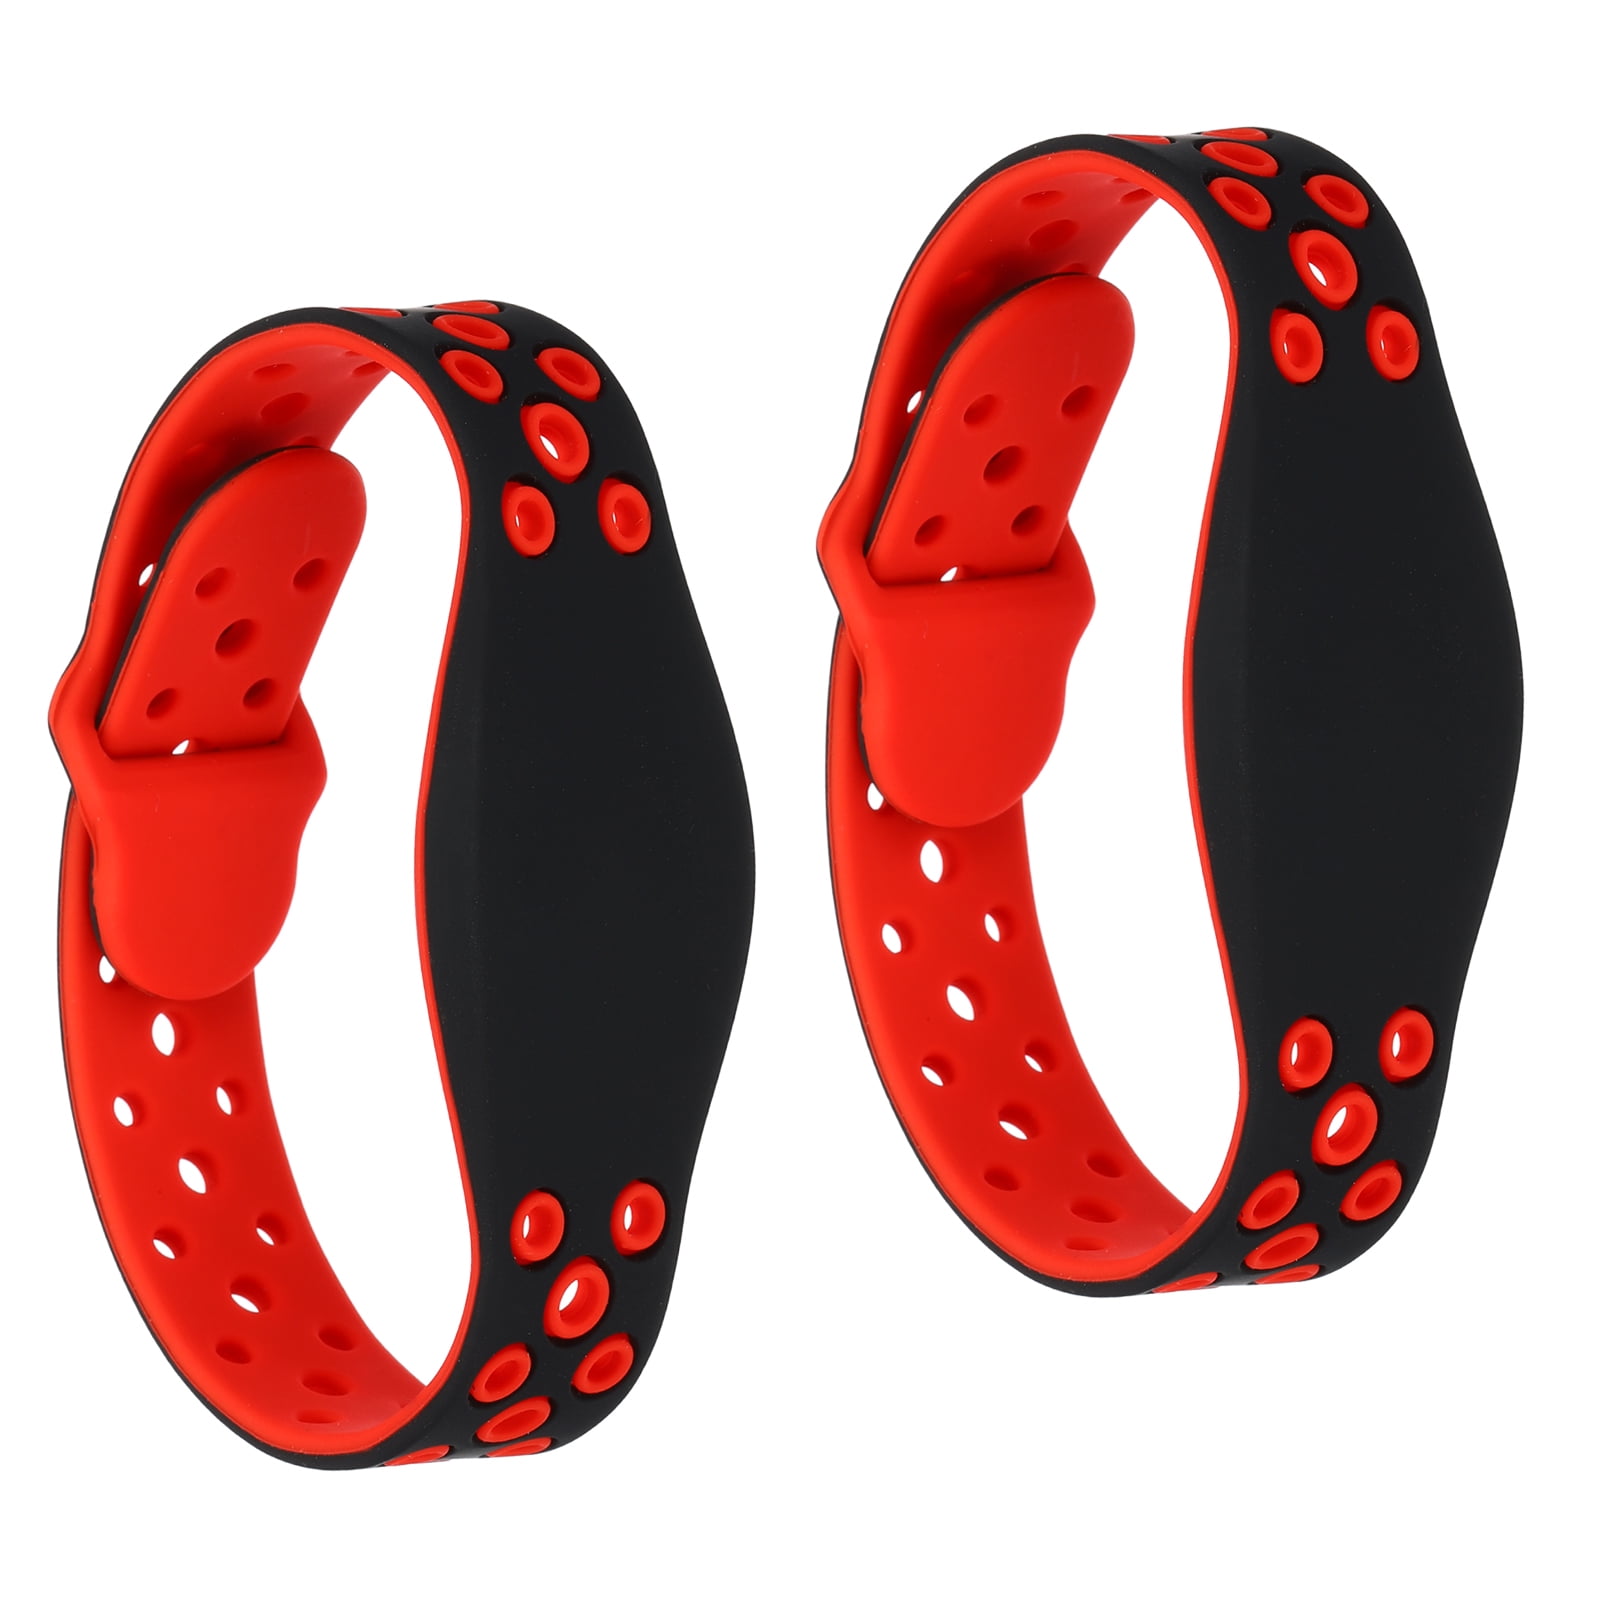 Buy China Wholesale 13.56mhz Writable Programmable Silicone Wristband Rfid  Bracelet & Rfid Wristband $0.25 | Globalsources.com